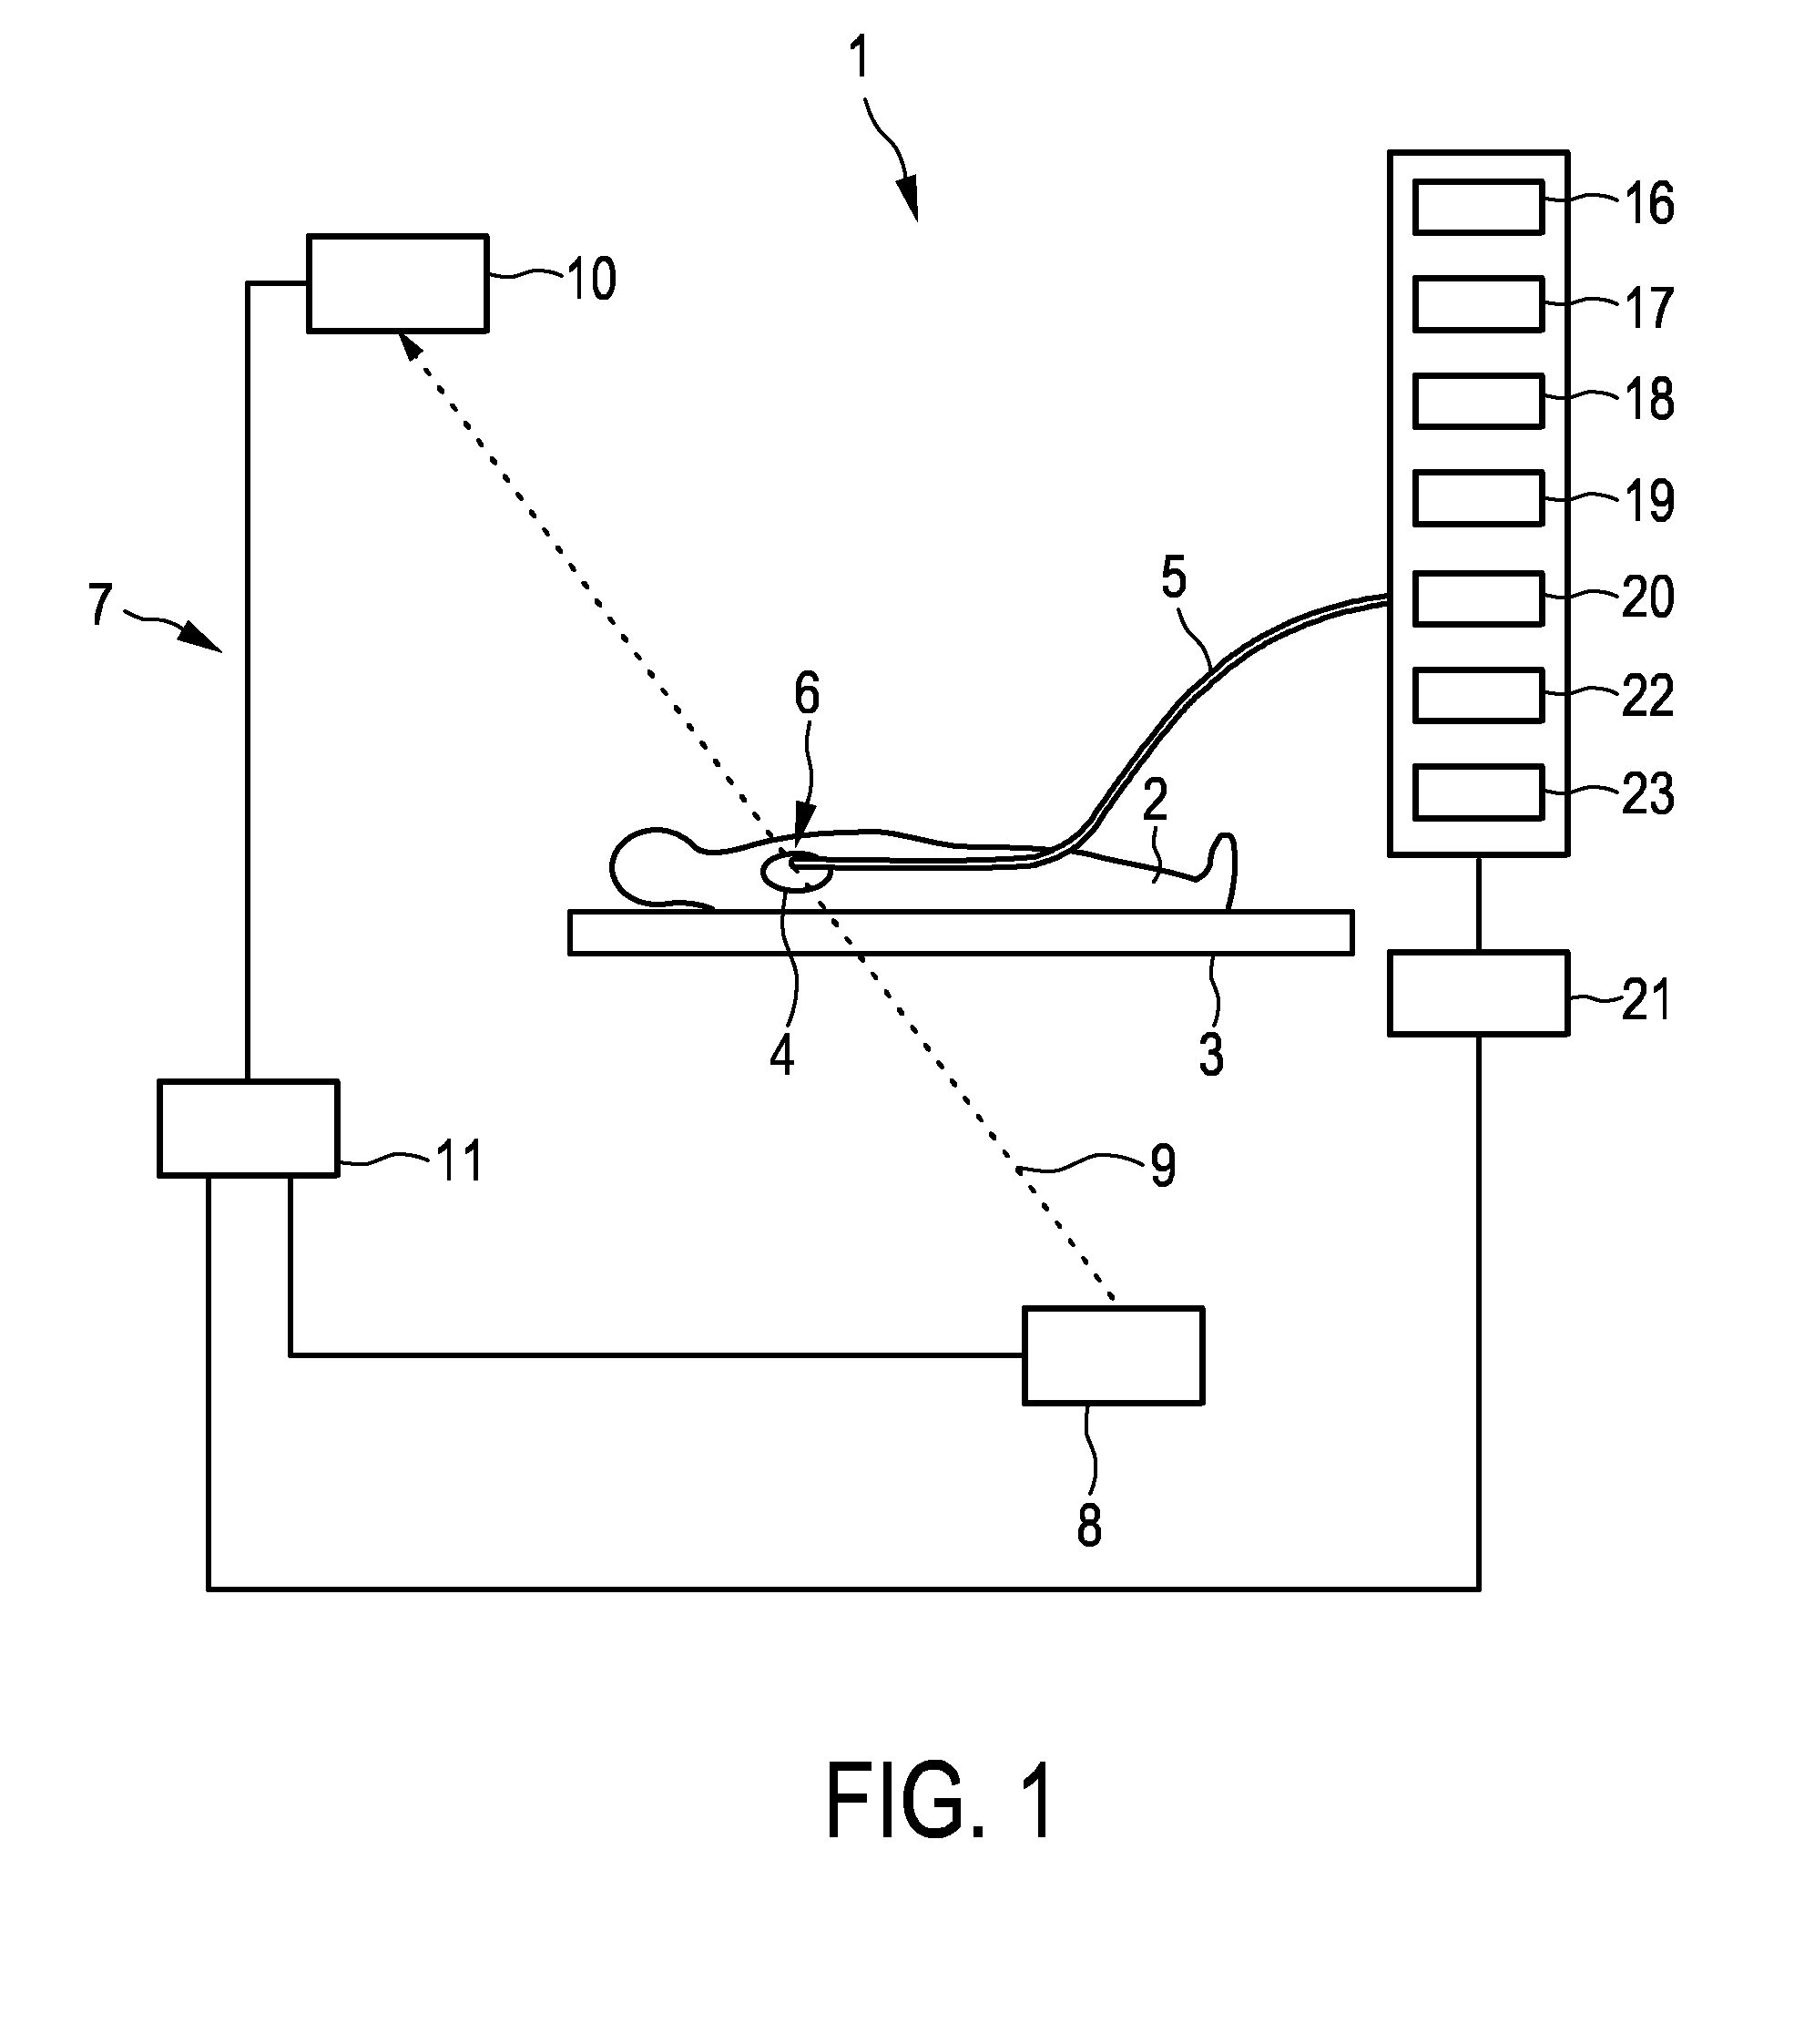 Imaging system for imaging a periodically moving object